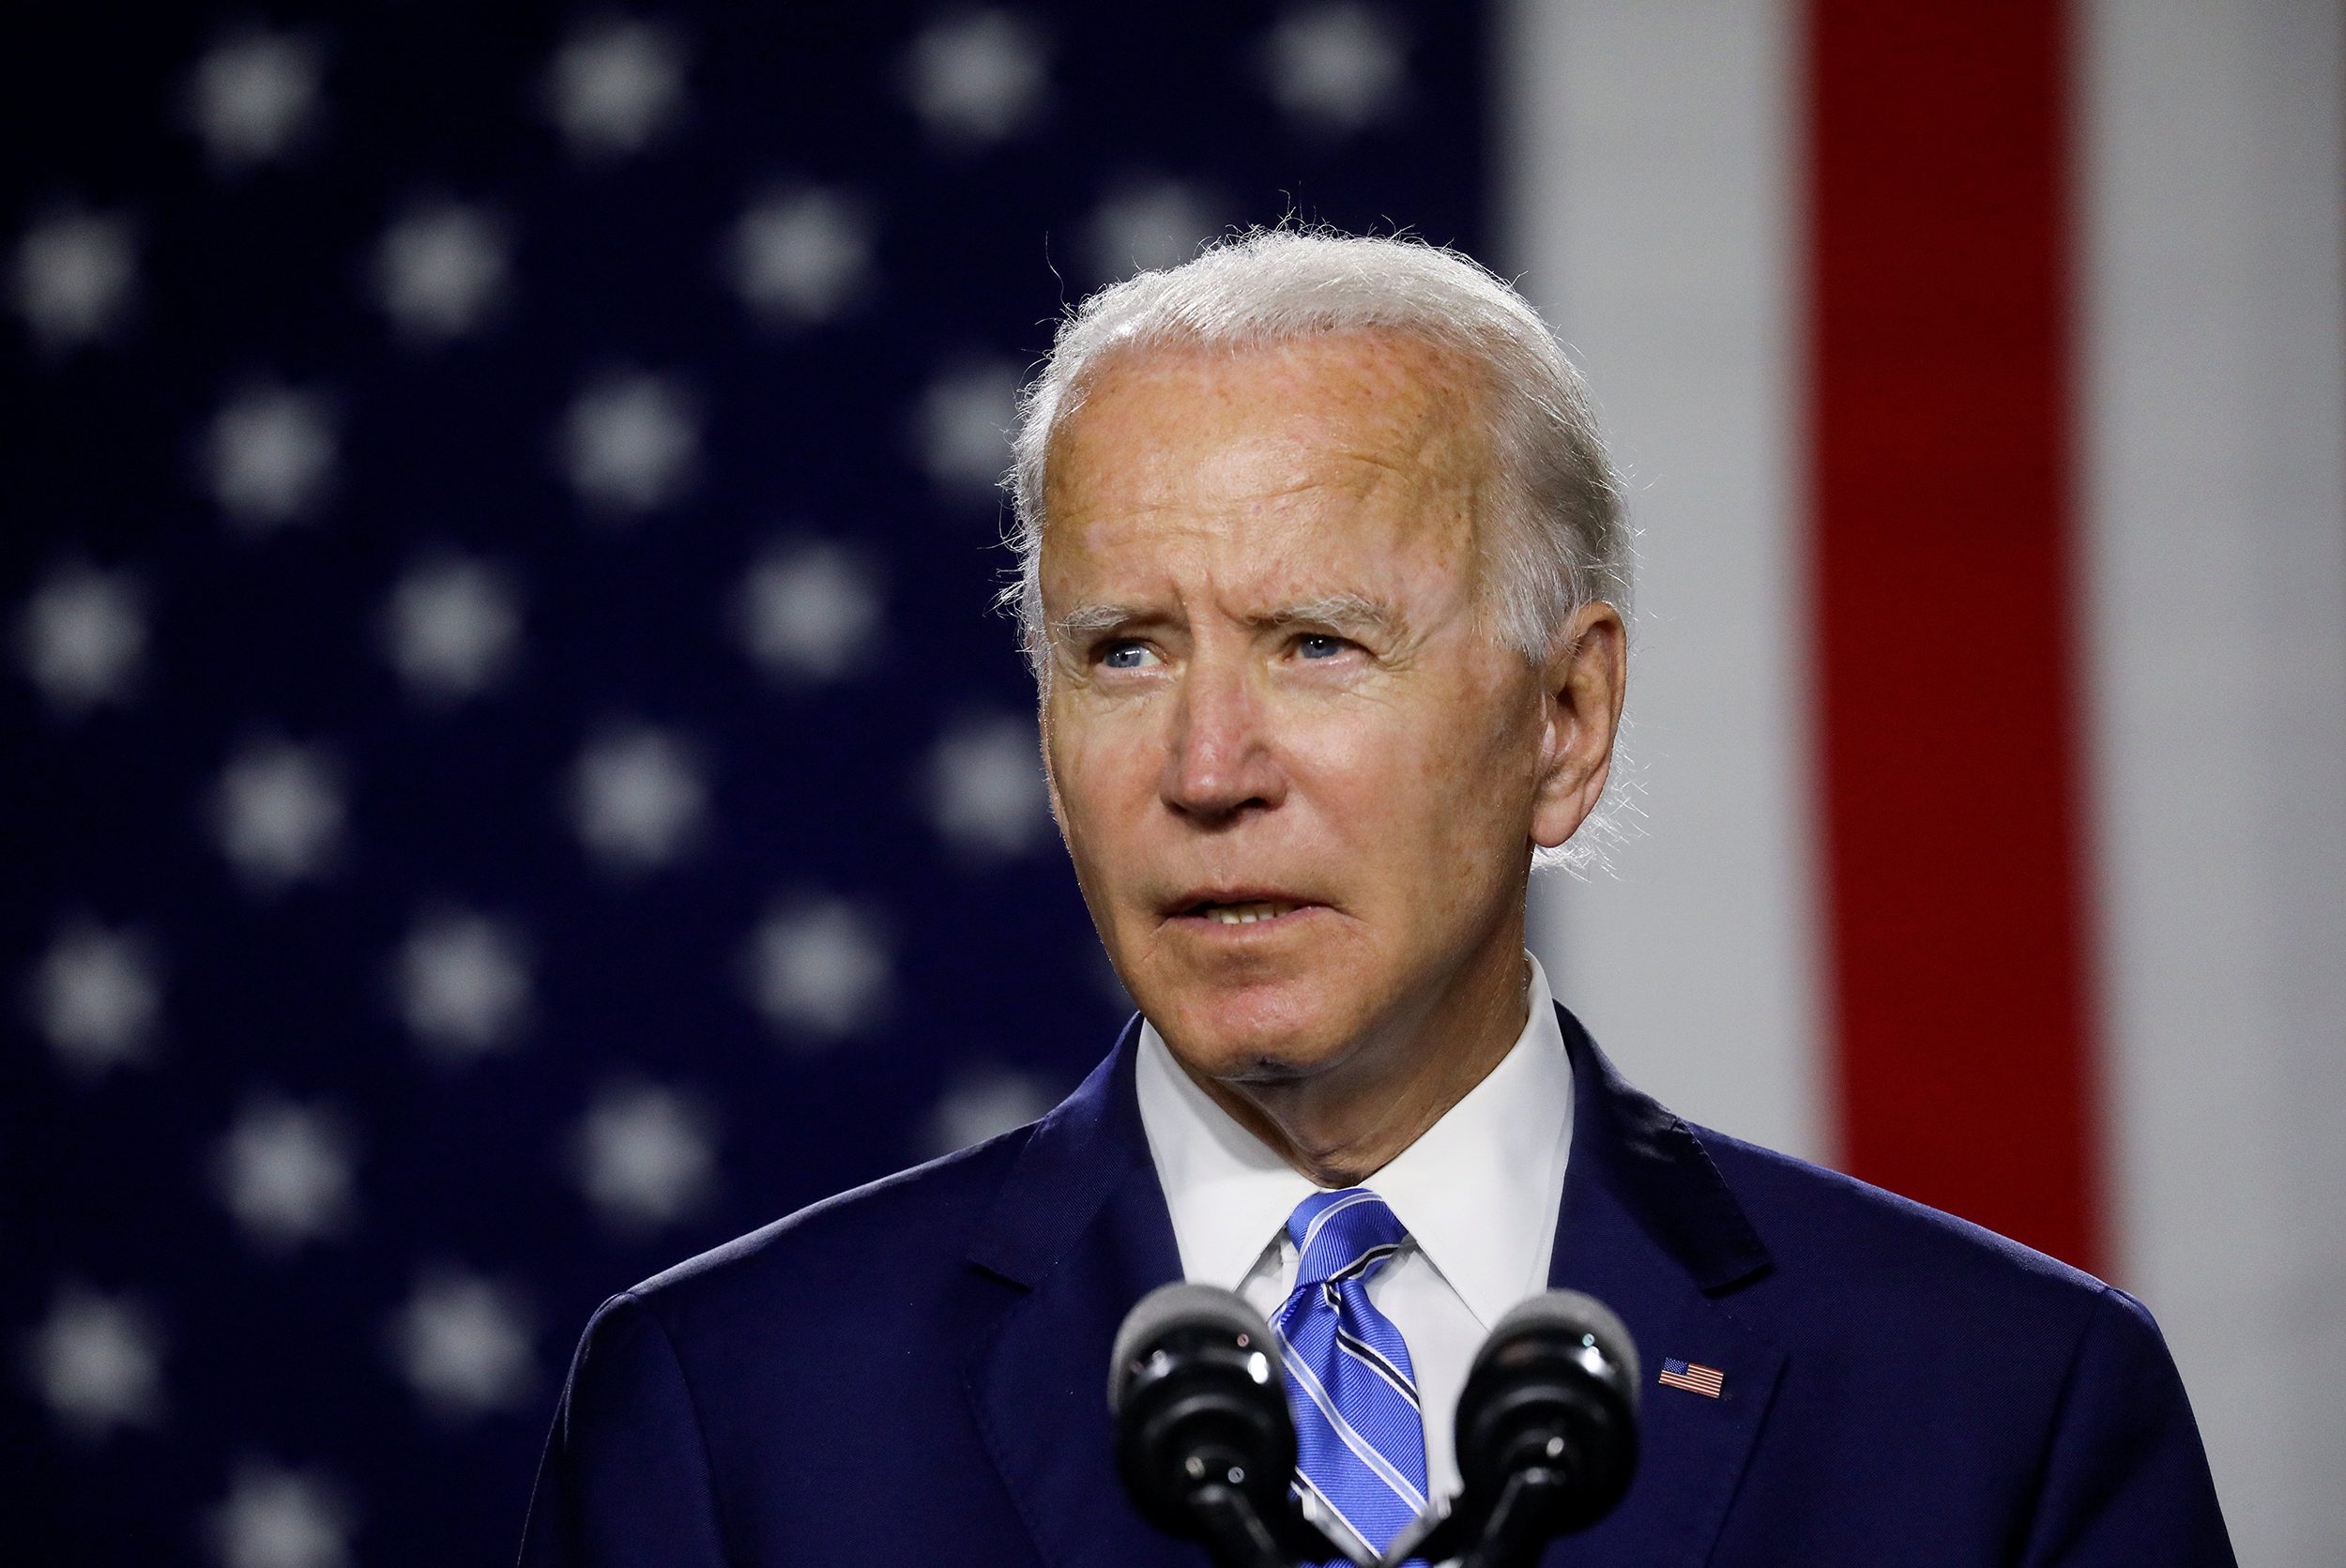 Image: Democratic U.S. presidential candidate Biden holds campaign event in Wilmington, Delaware